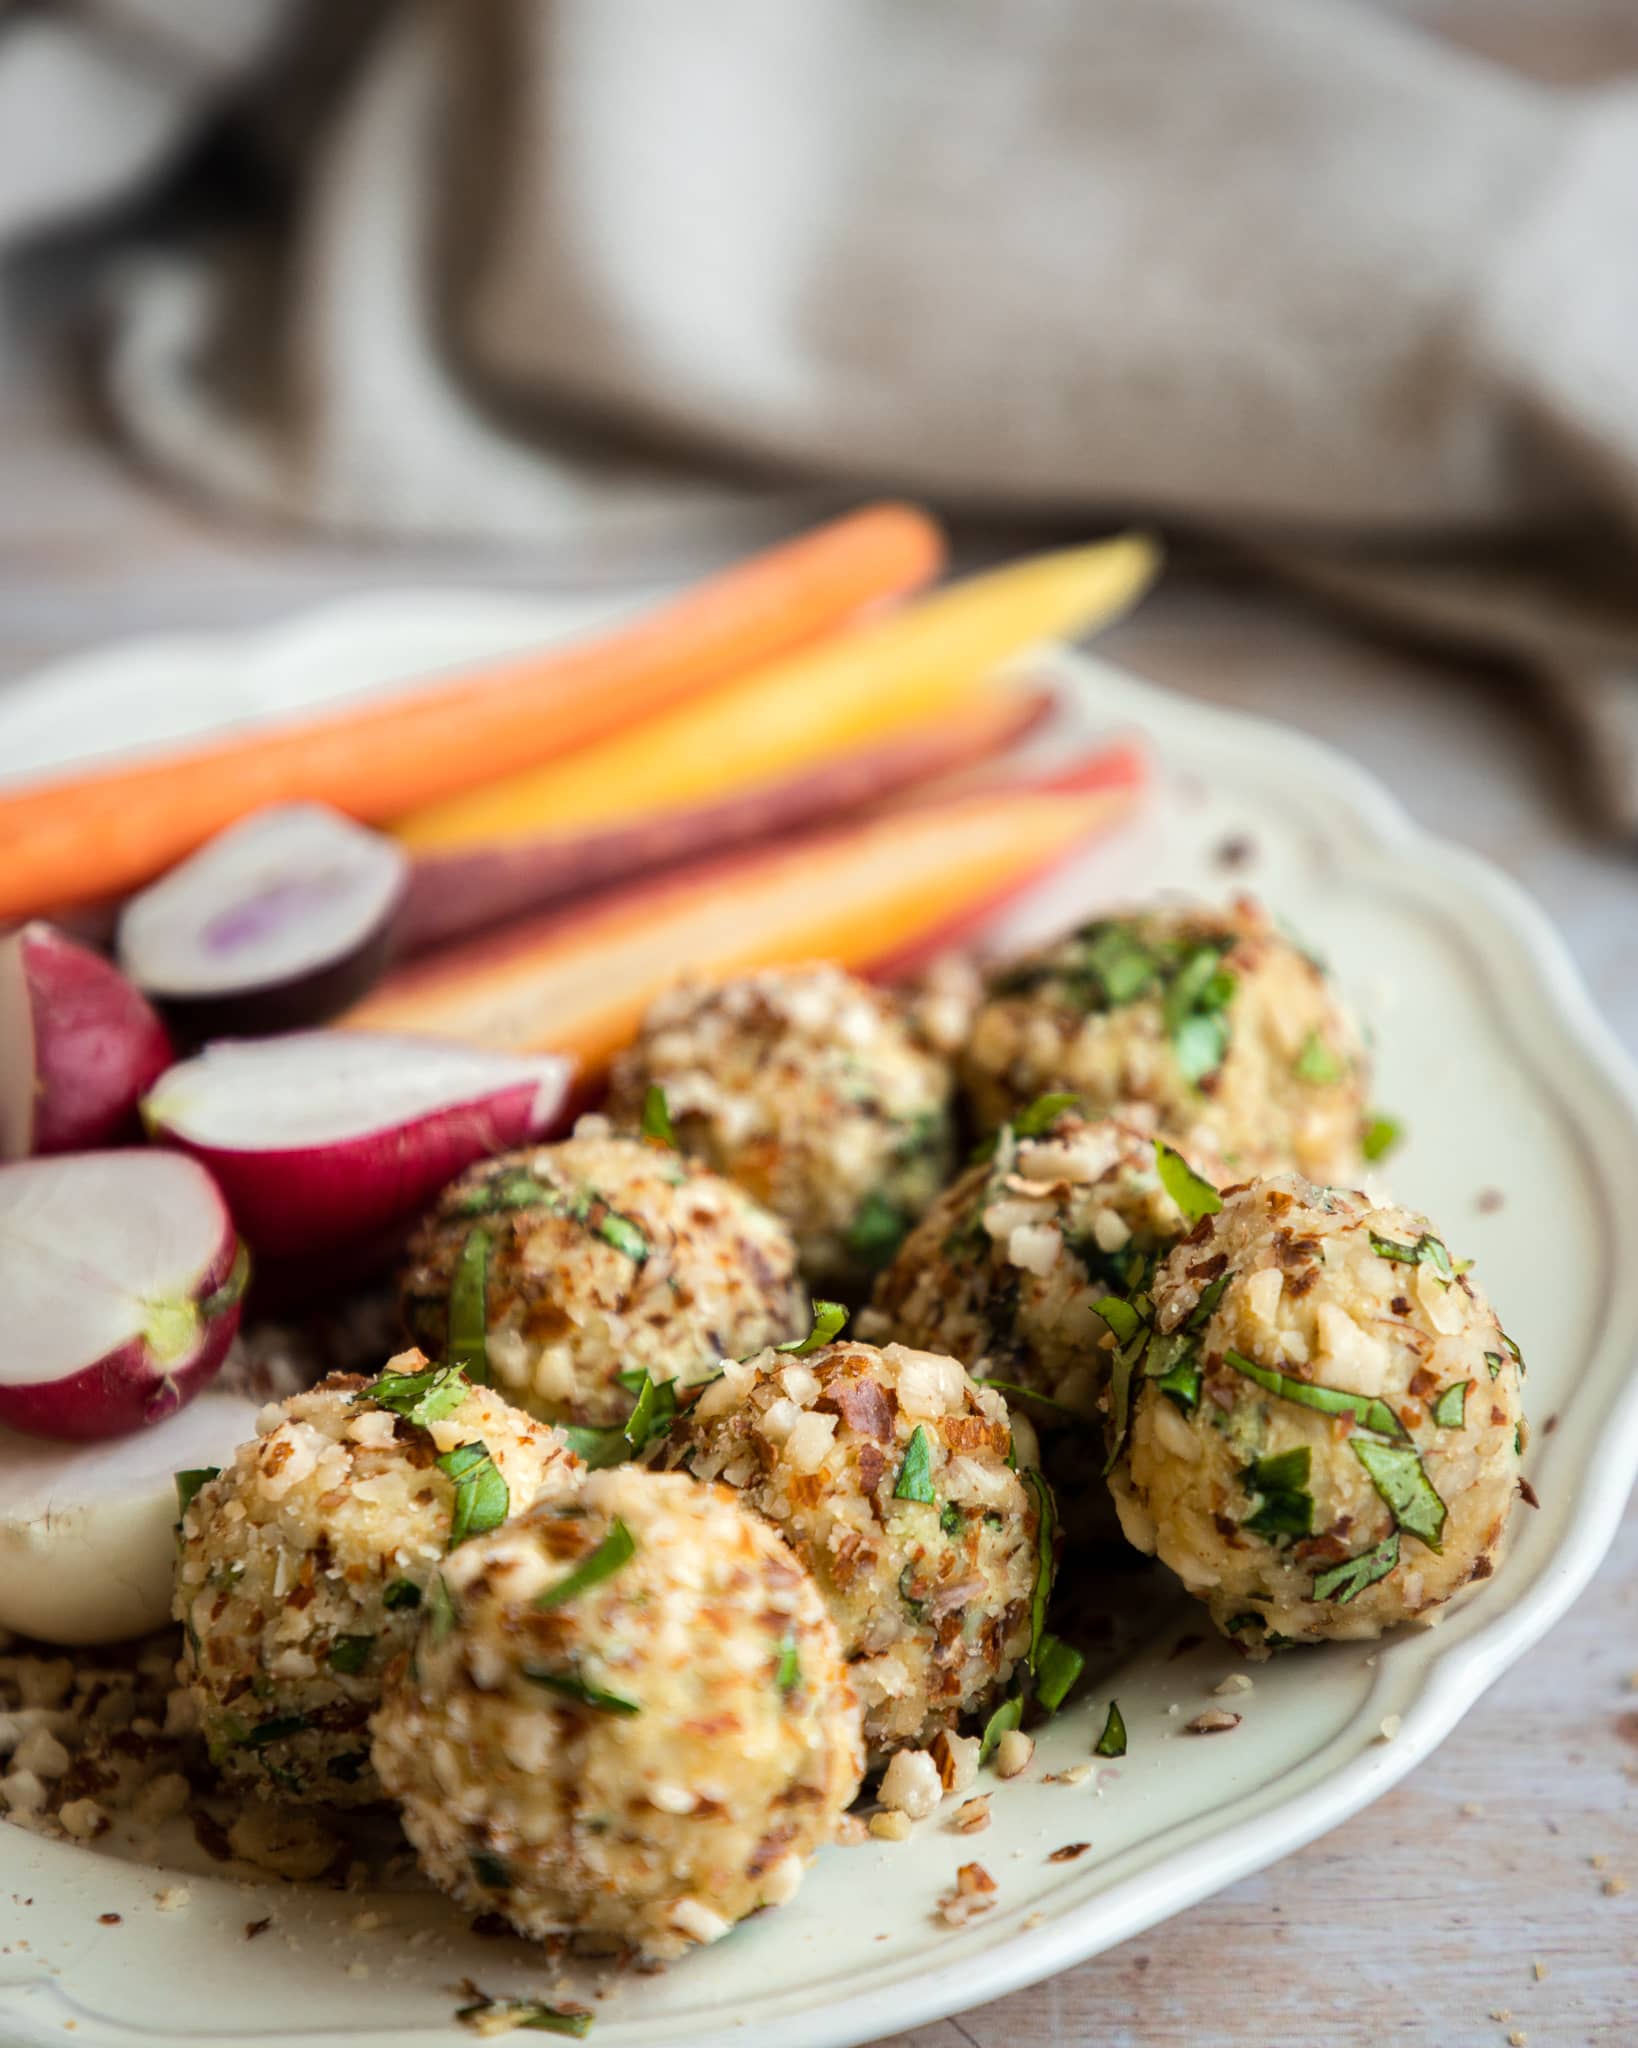 Vegan cheese ball with nuts and herbs